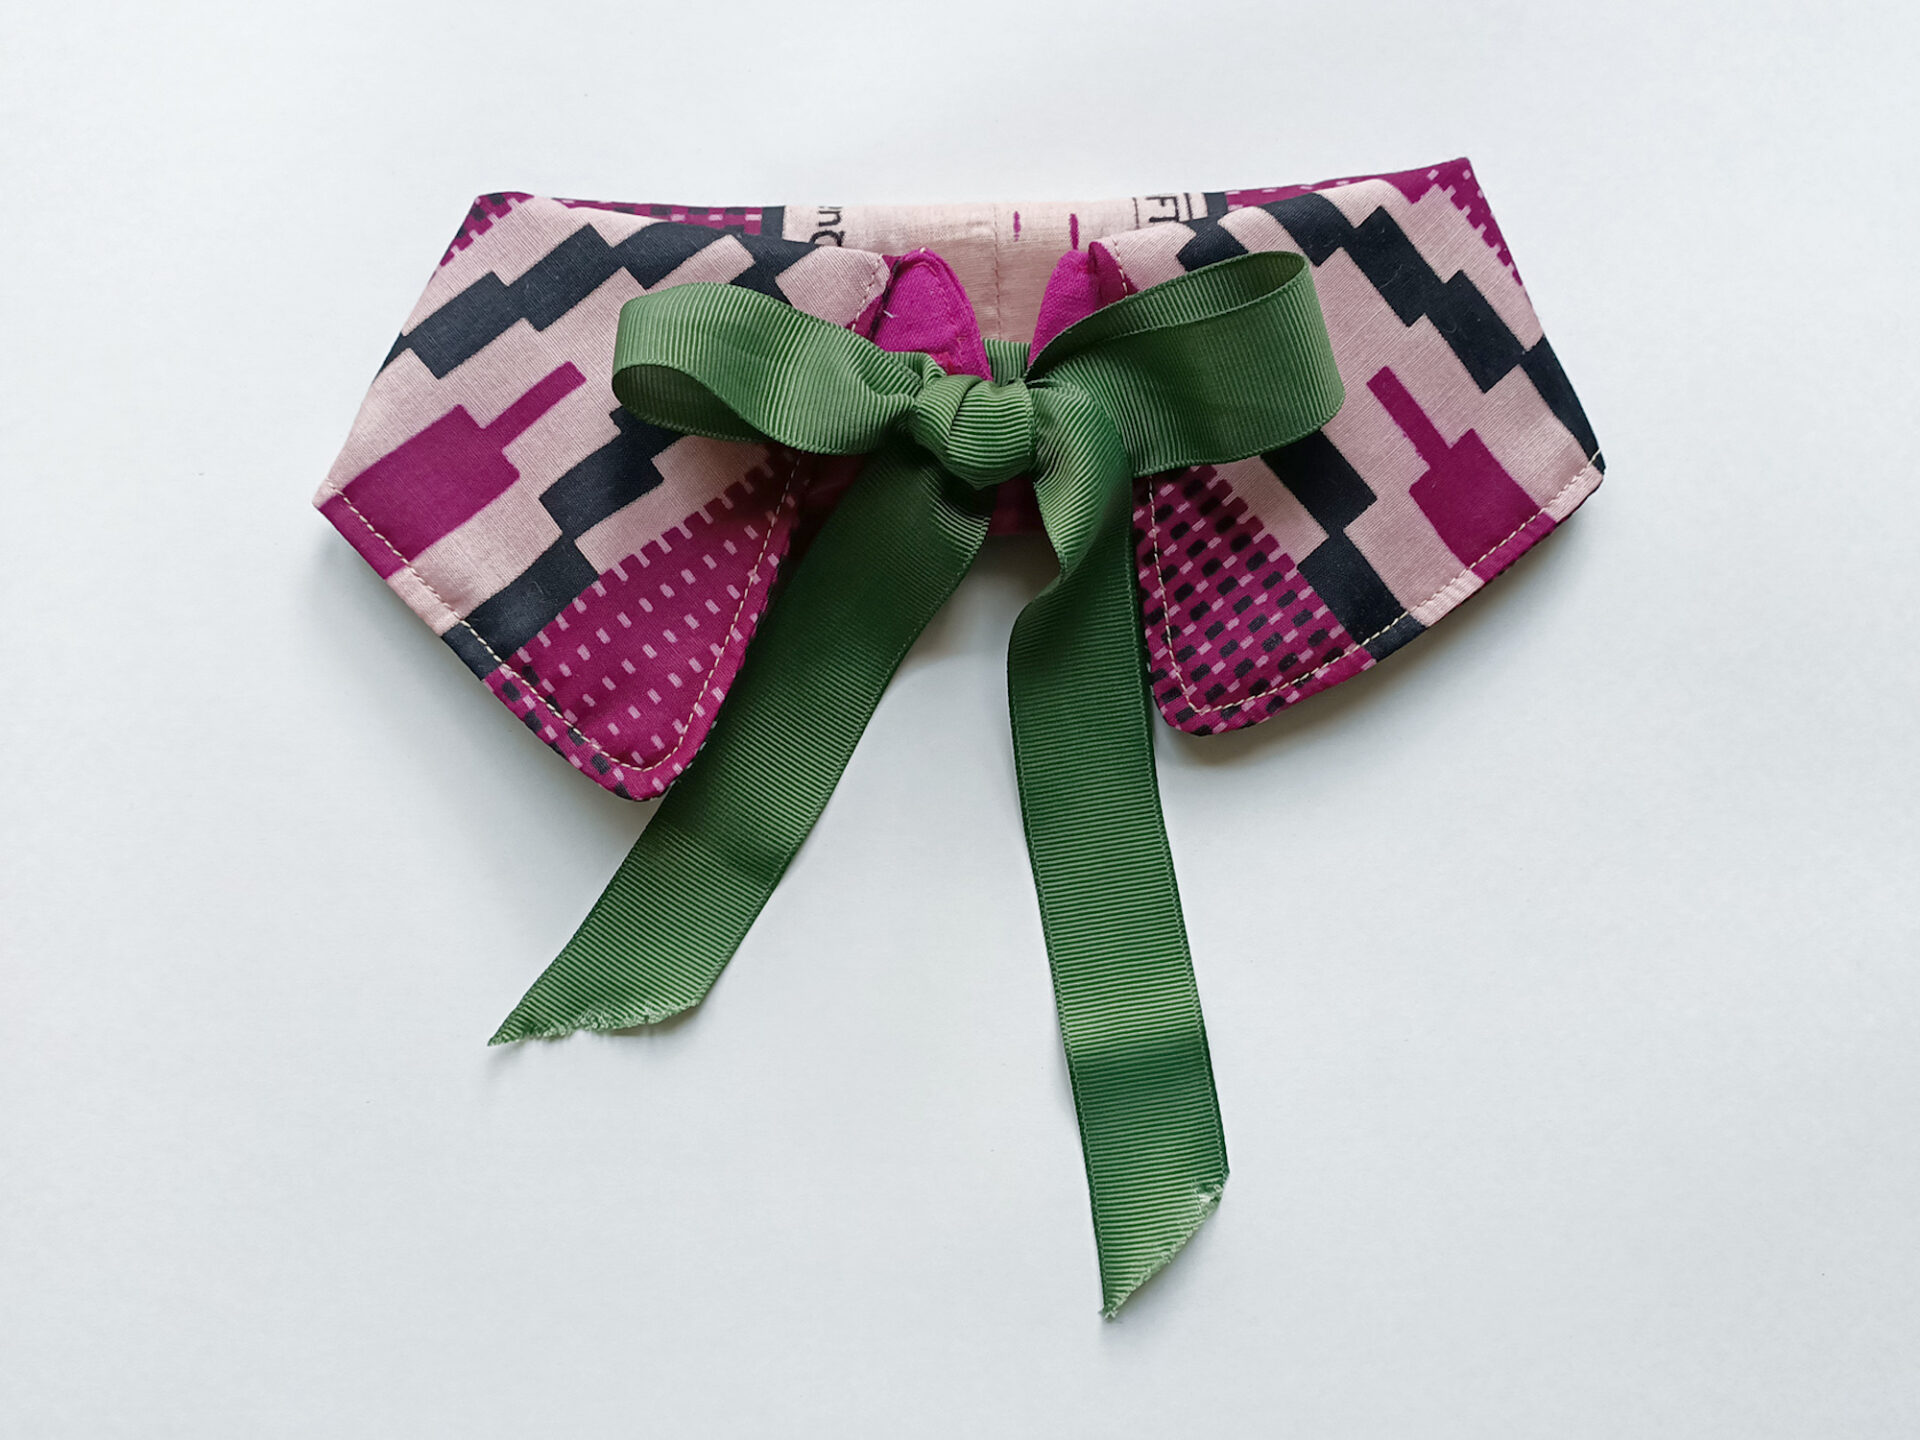 detachable collar sewn from purple and green fabric